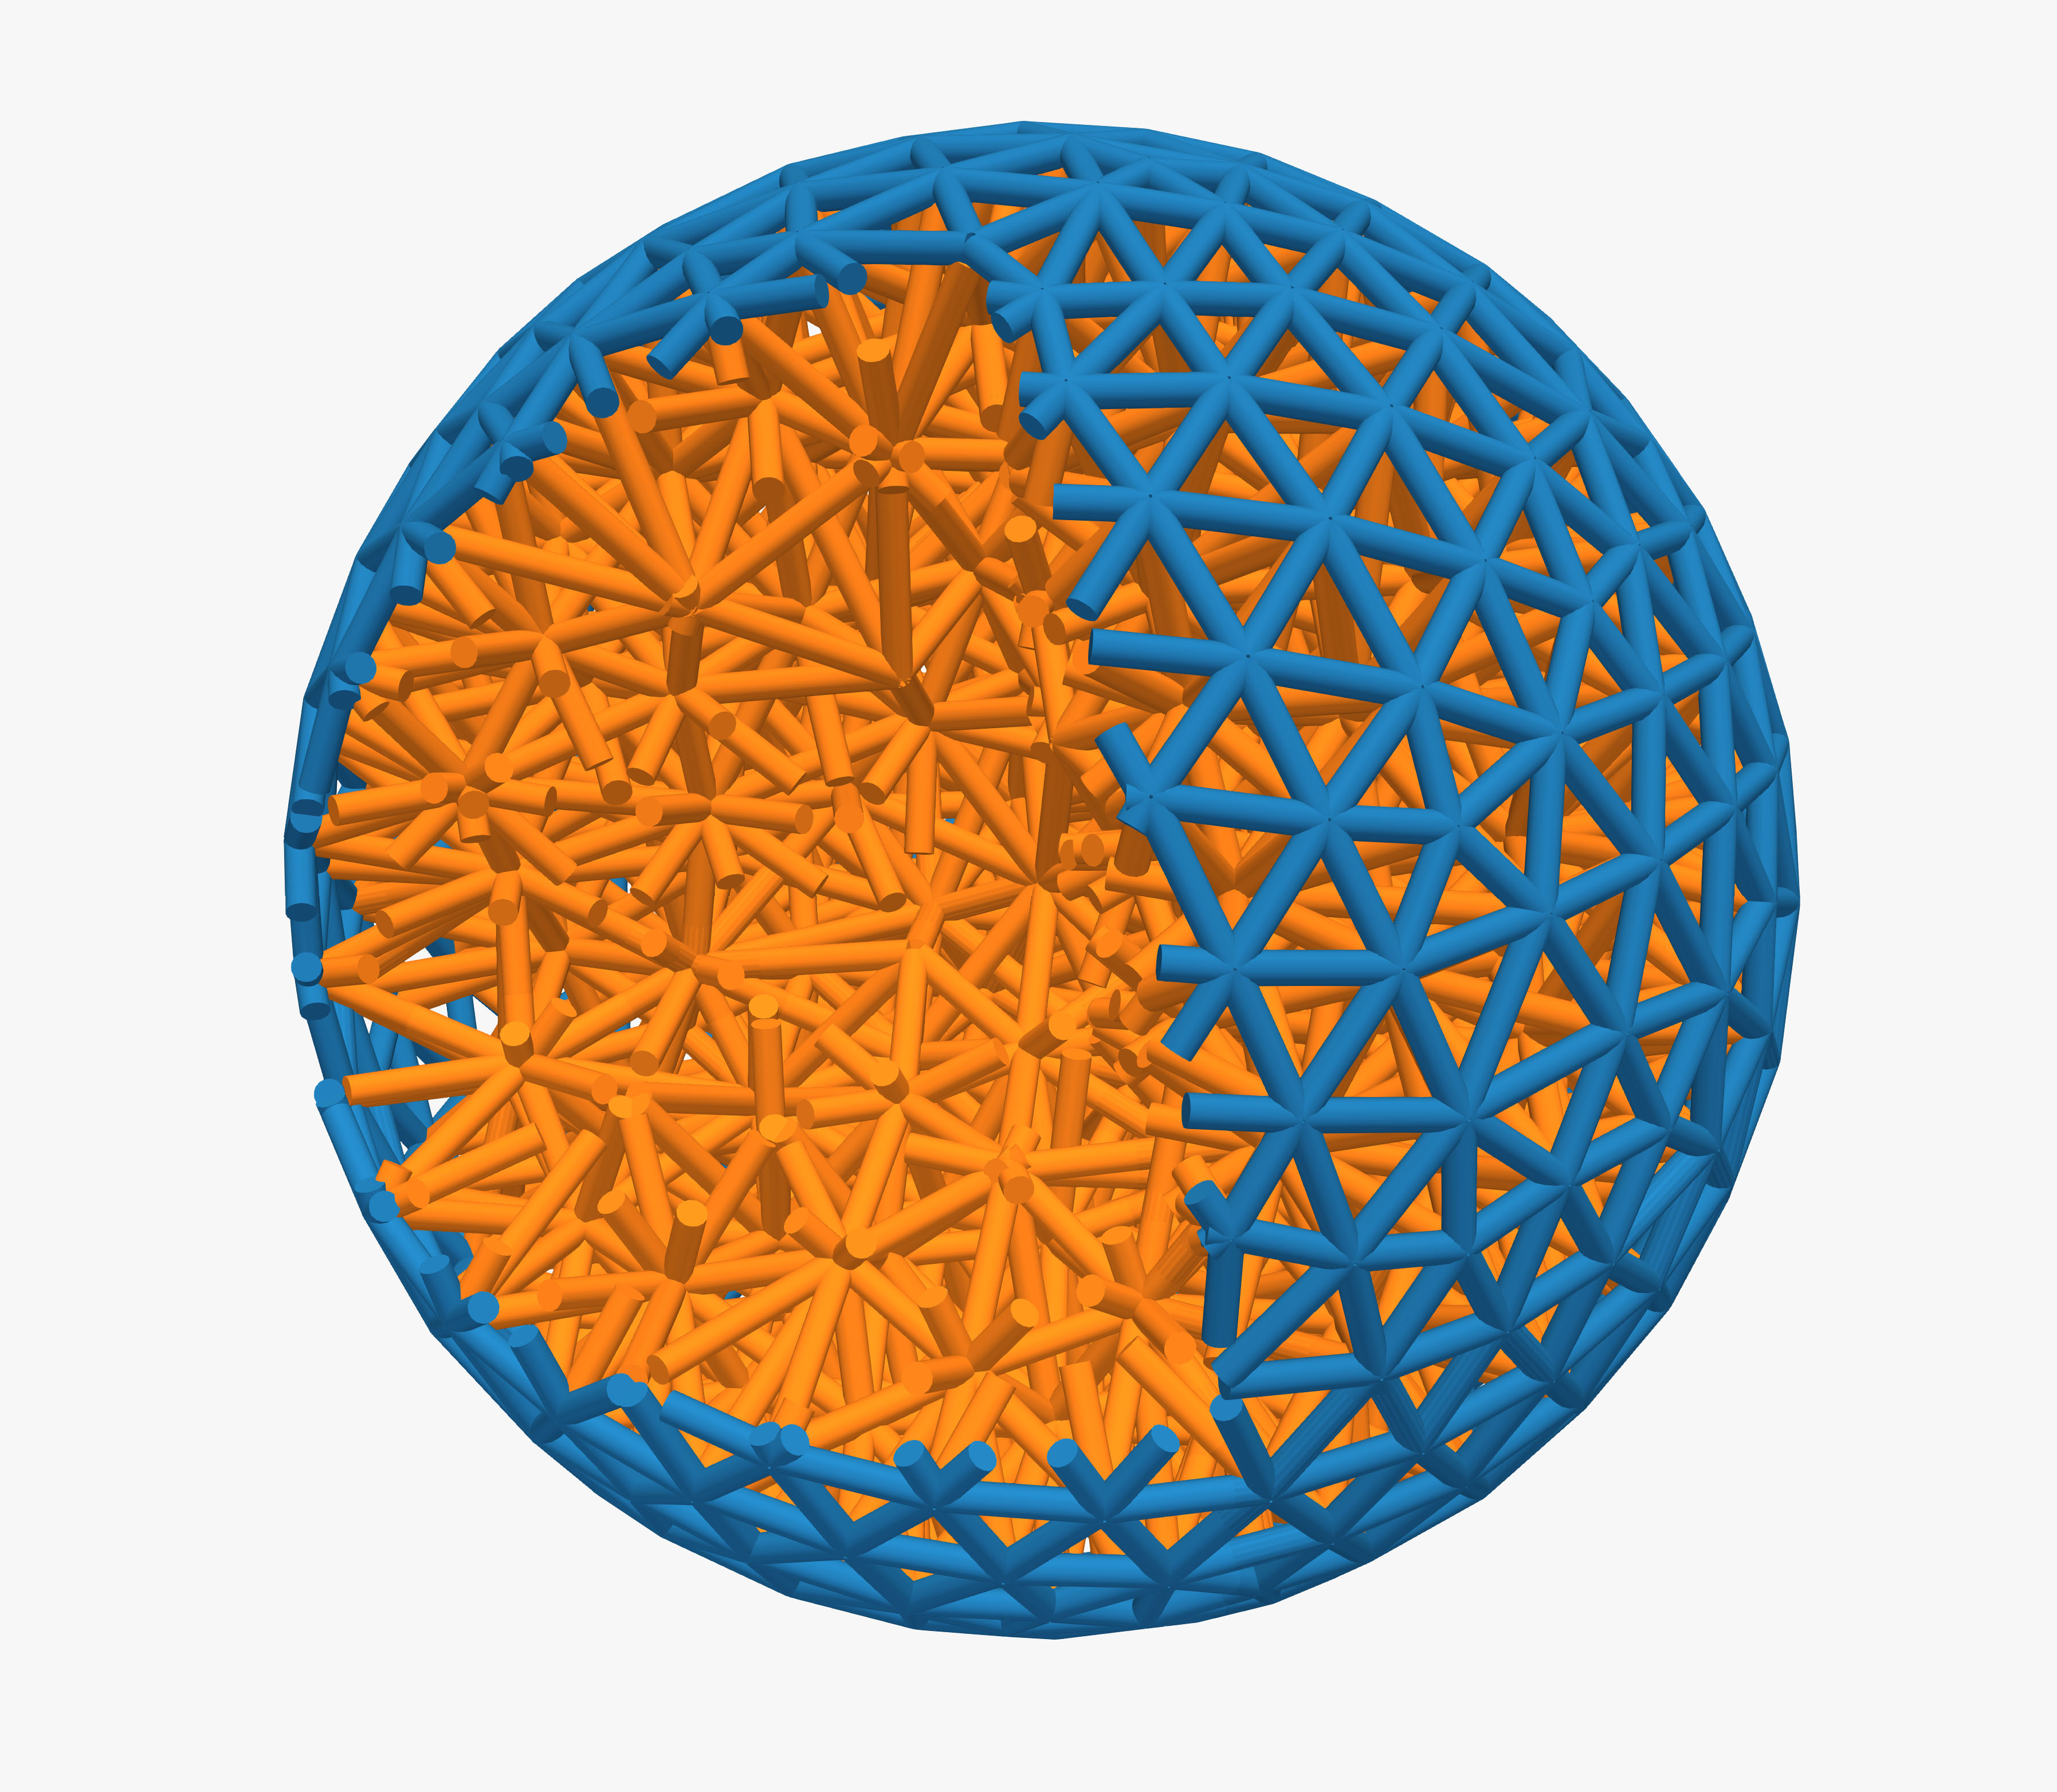 Wrapping an elastic ball (orange) in a layer of tiny robots (blue) allows researchers to program shape and behaviour